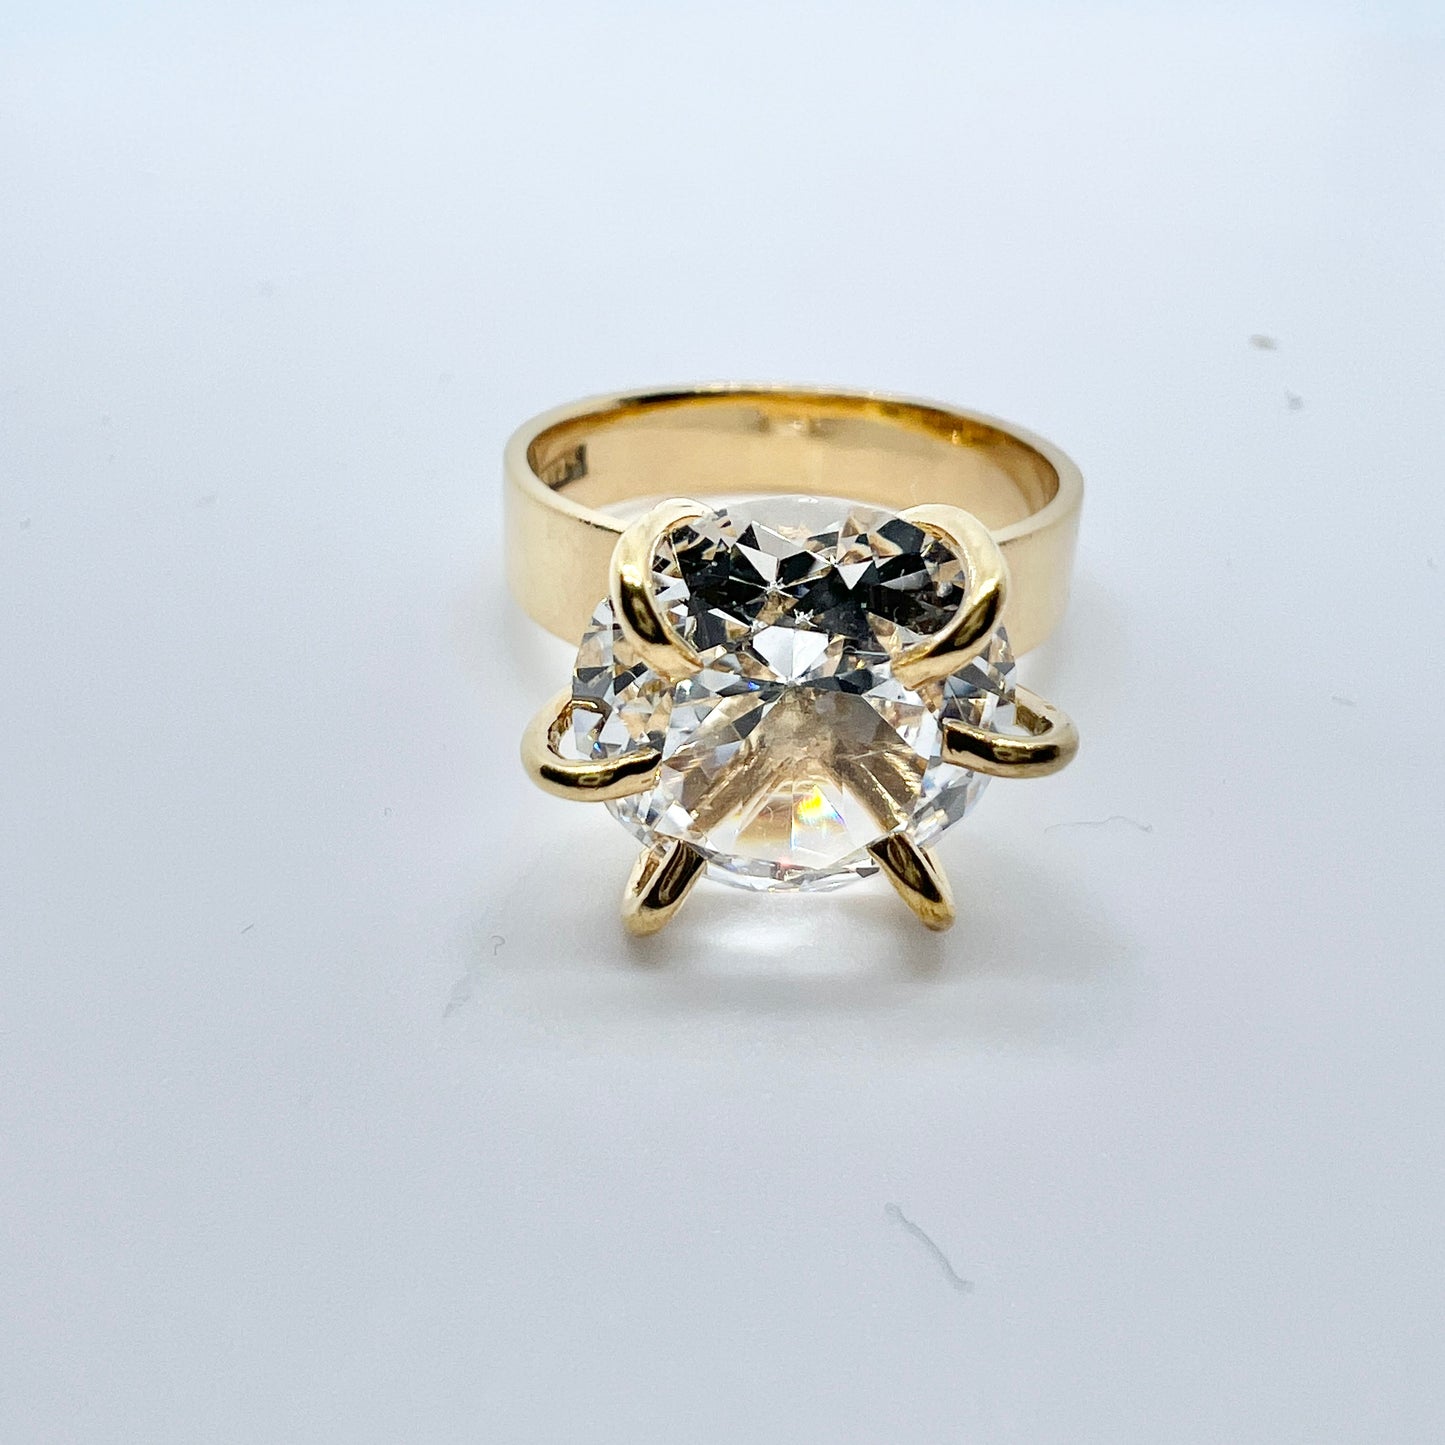 Styletta, Sweden 1968. Vintage 18k Gold Synthetic Spinel Ring.